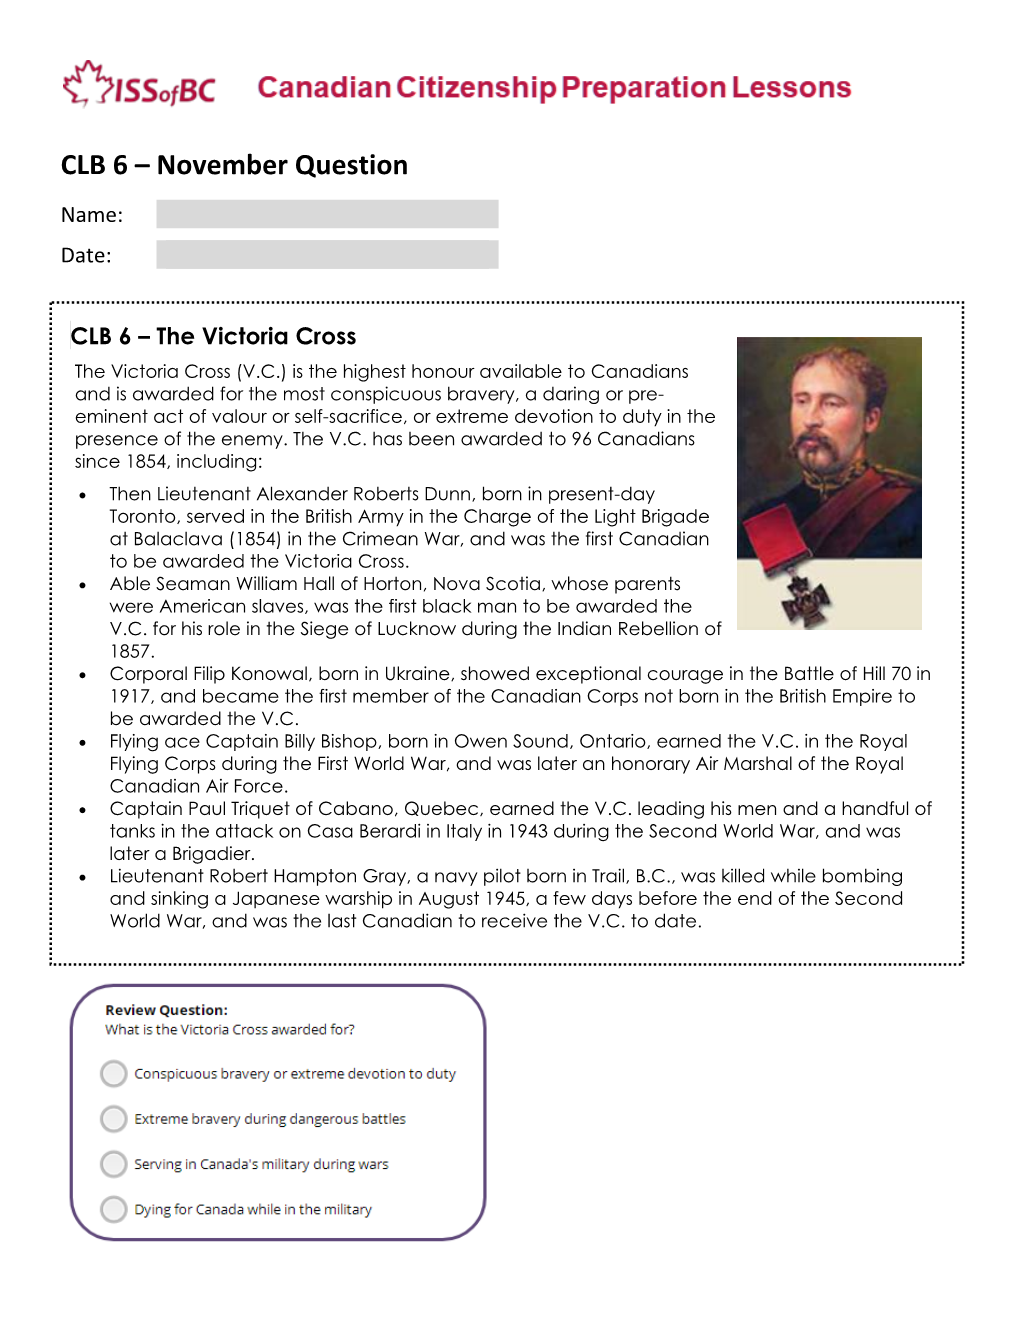 CLB 6 – November Question Name: Date